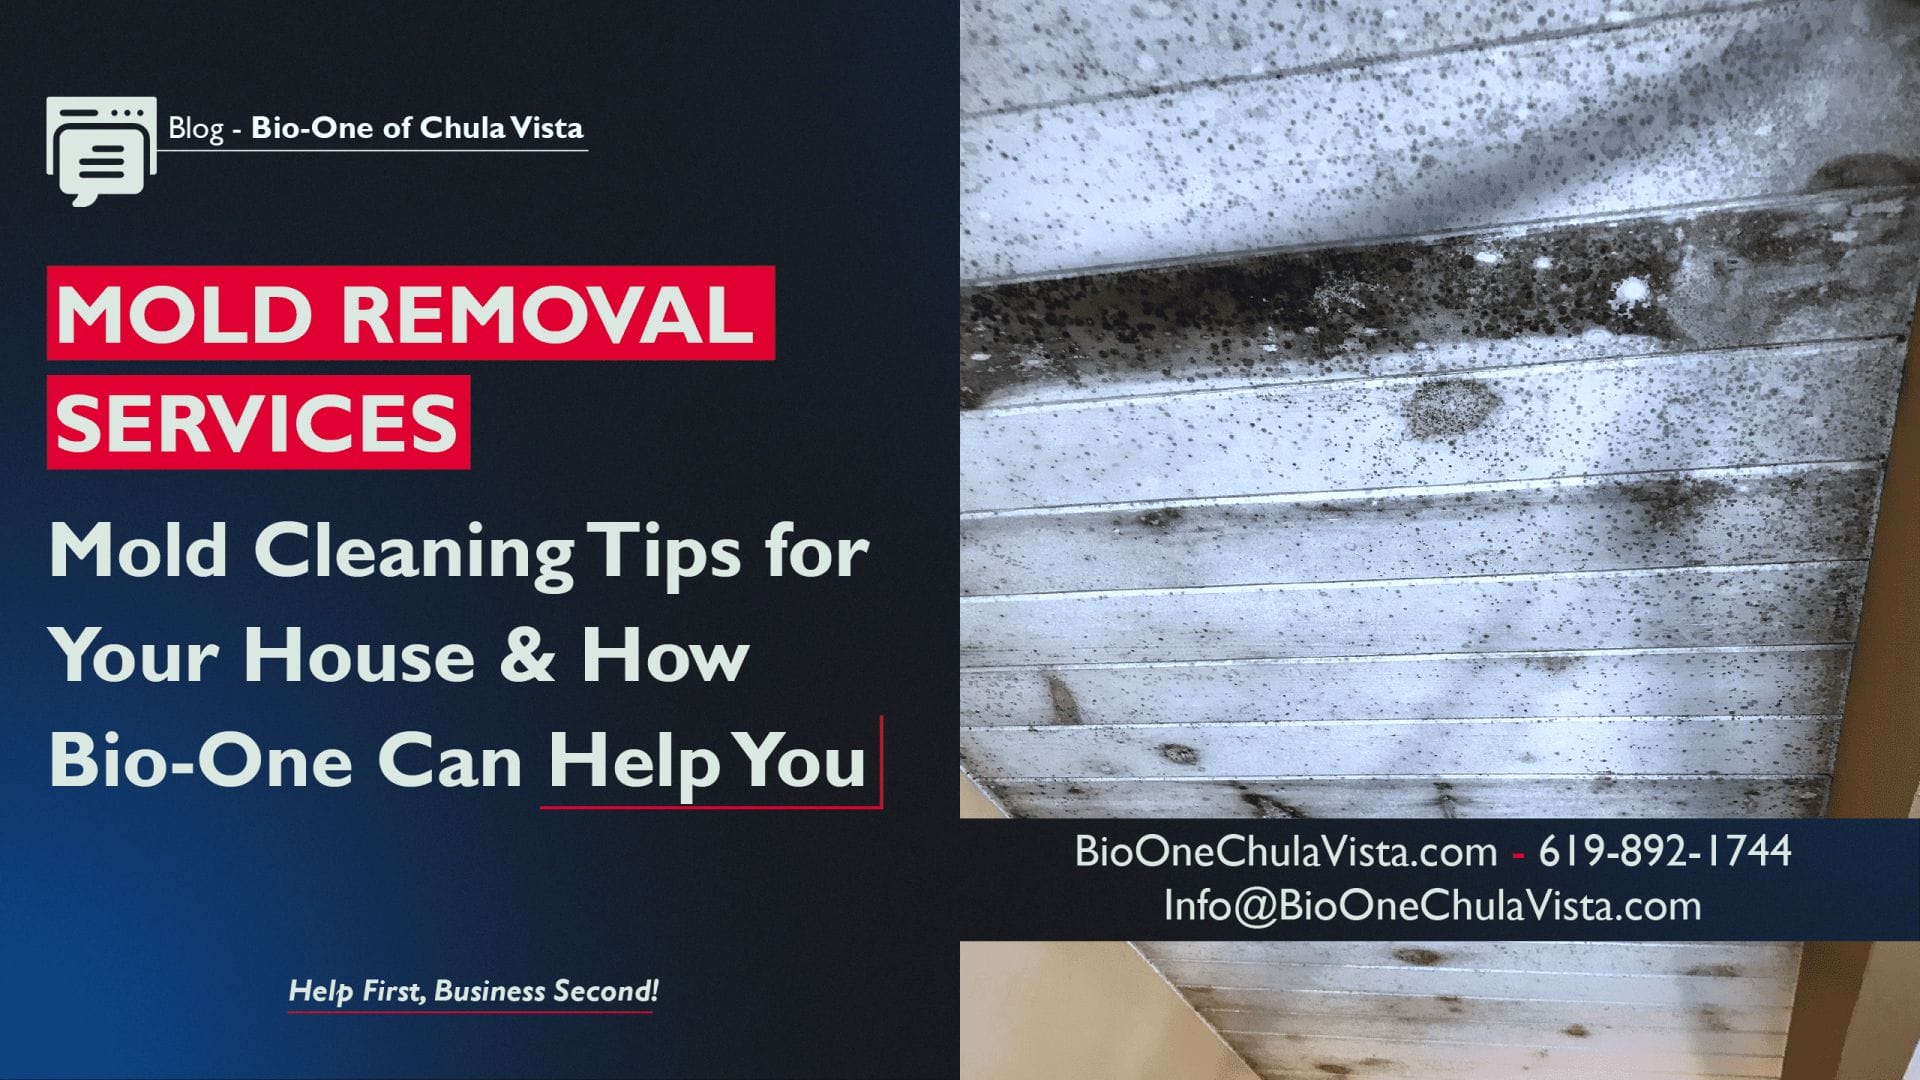 Mold Cleaning Tips for Your House & How Bio-One Can Help You